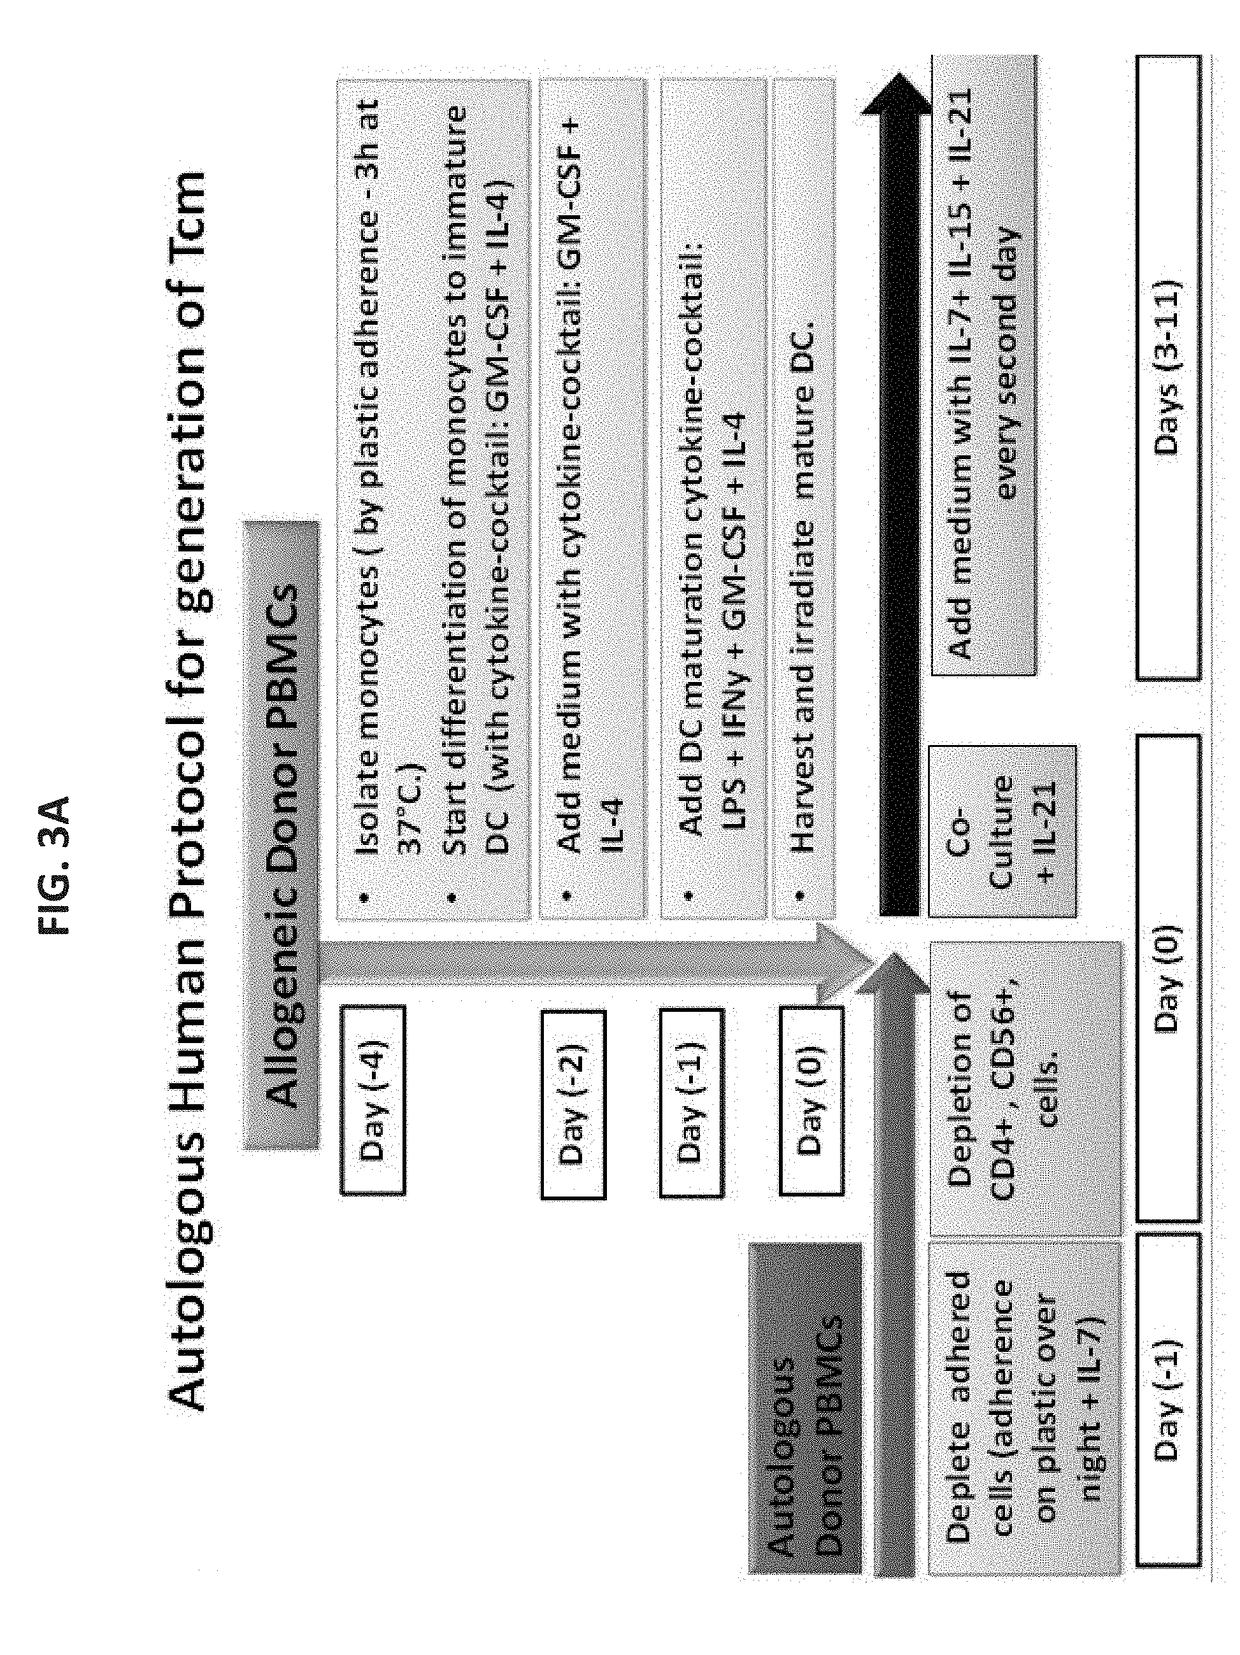 Anti third party central memory t cells, methods of producing same and use of same in transplantation and disease treatment